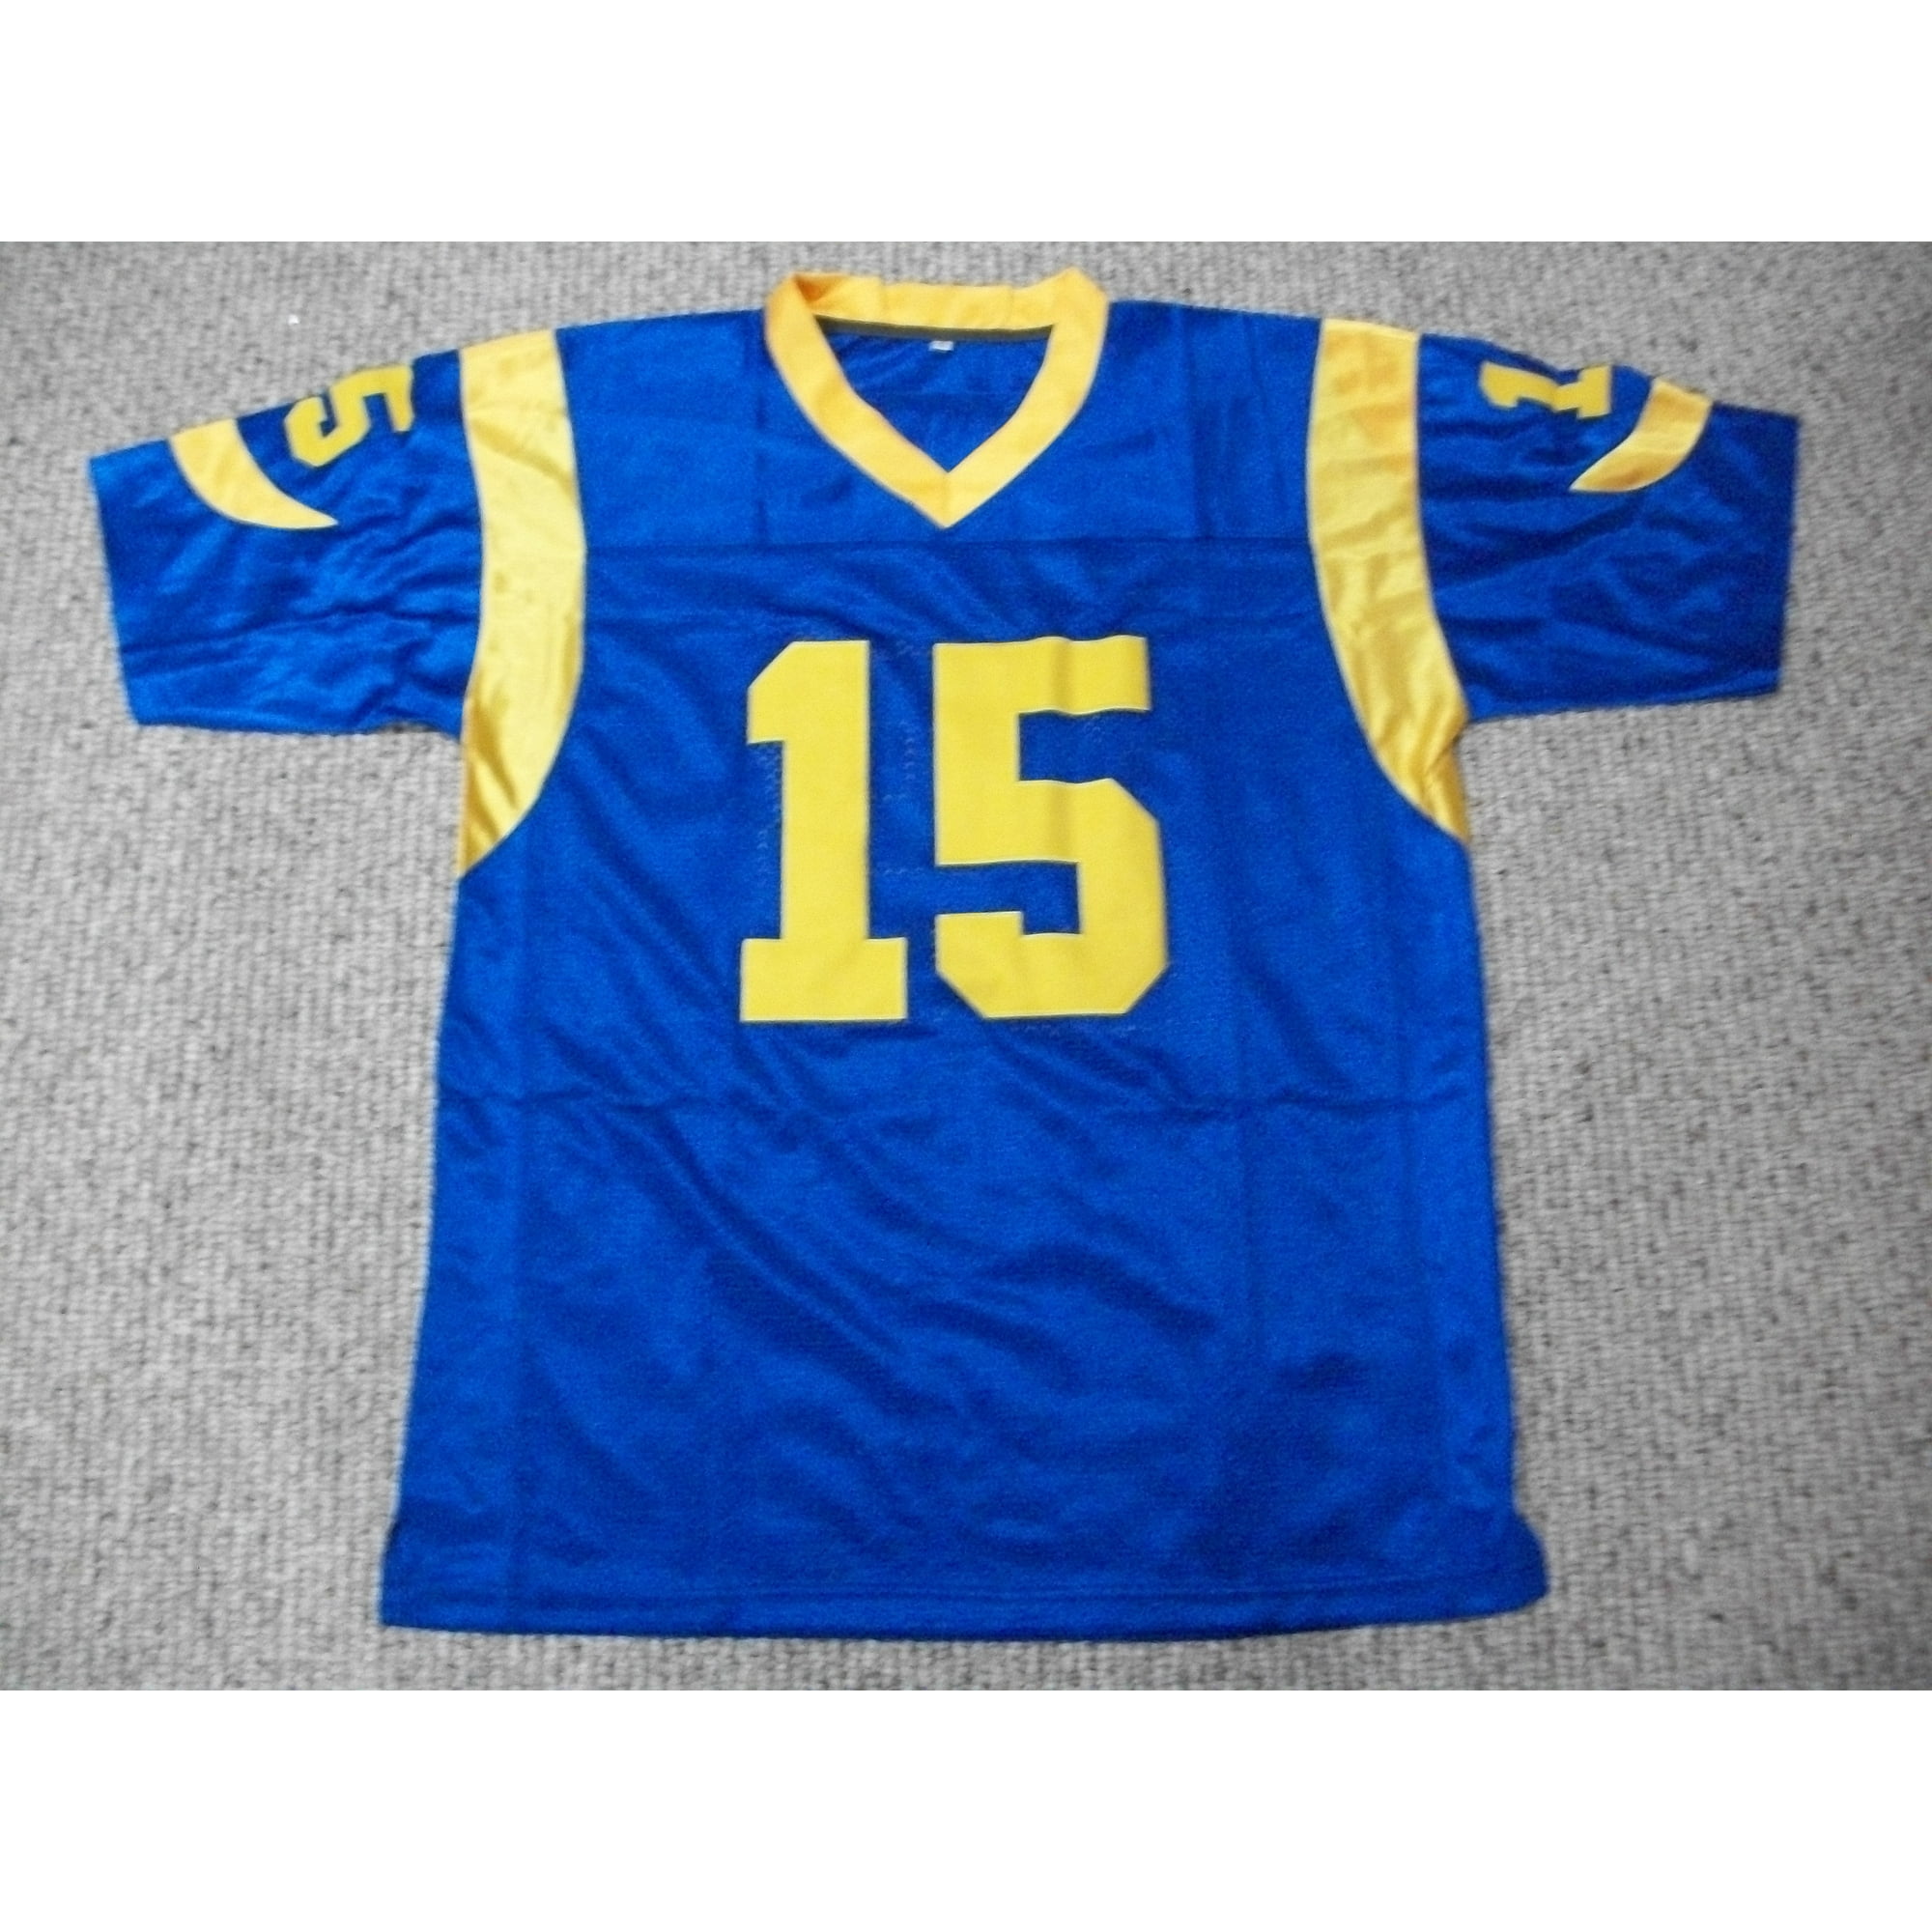 Jerseyrama Unsigned Vince Ferragamo Jersey #15 Los Angeles Custom Stitched Blue Football New No Brands/Logos Sizes S-3xl